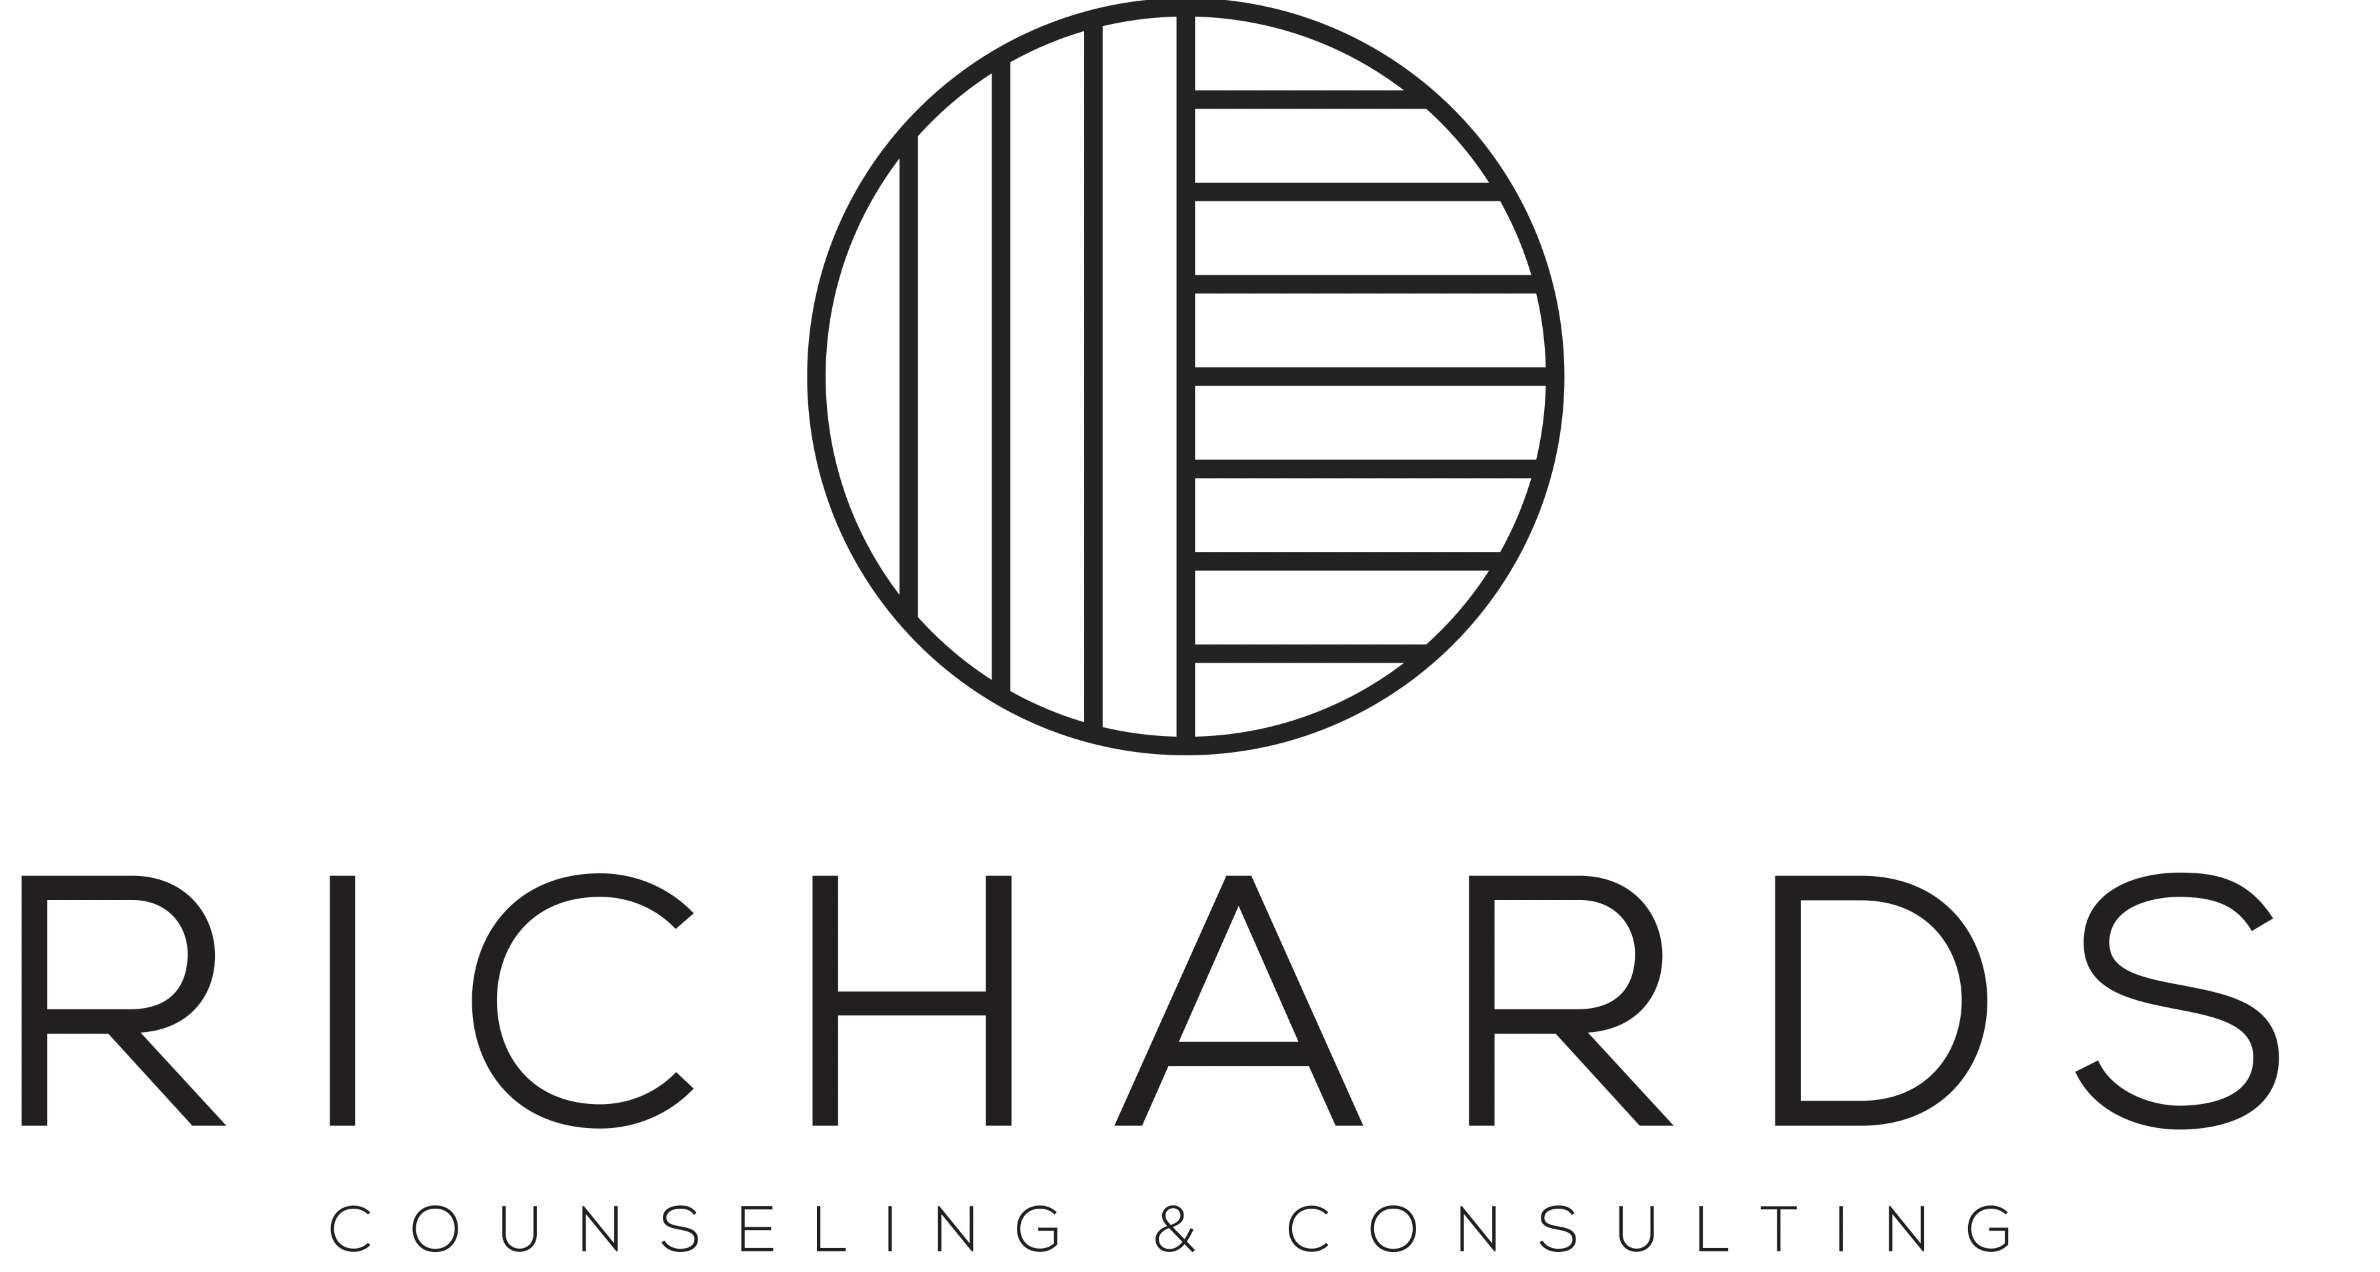 Richards Counseling & Consulting